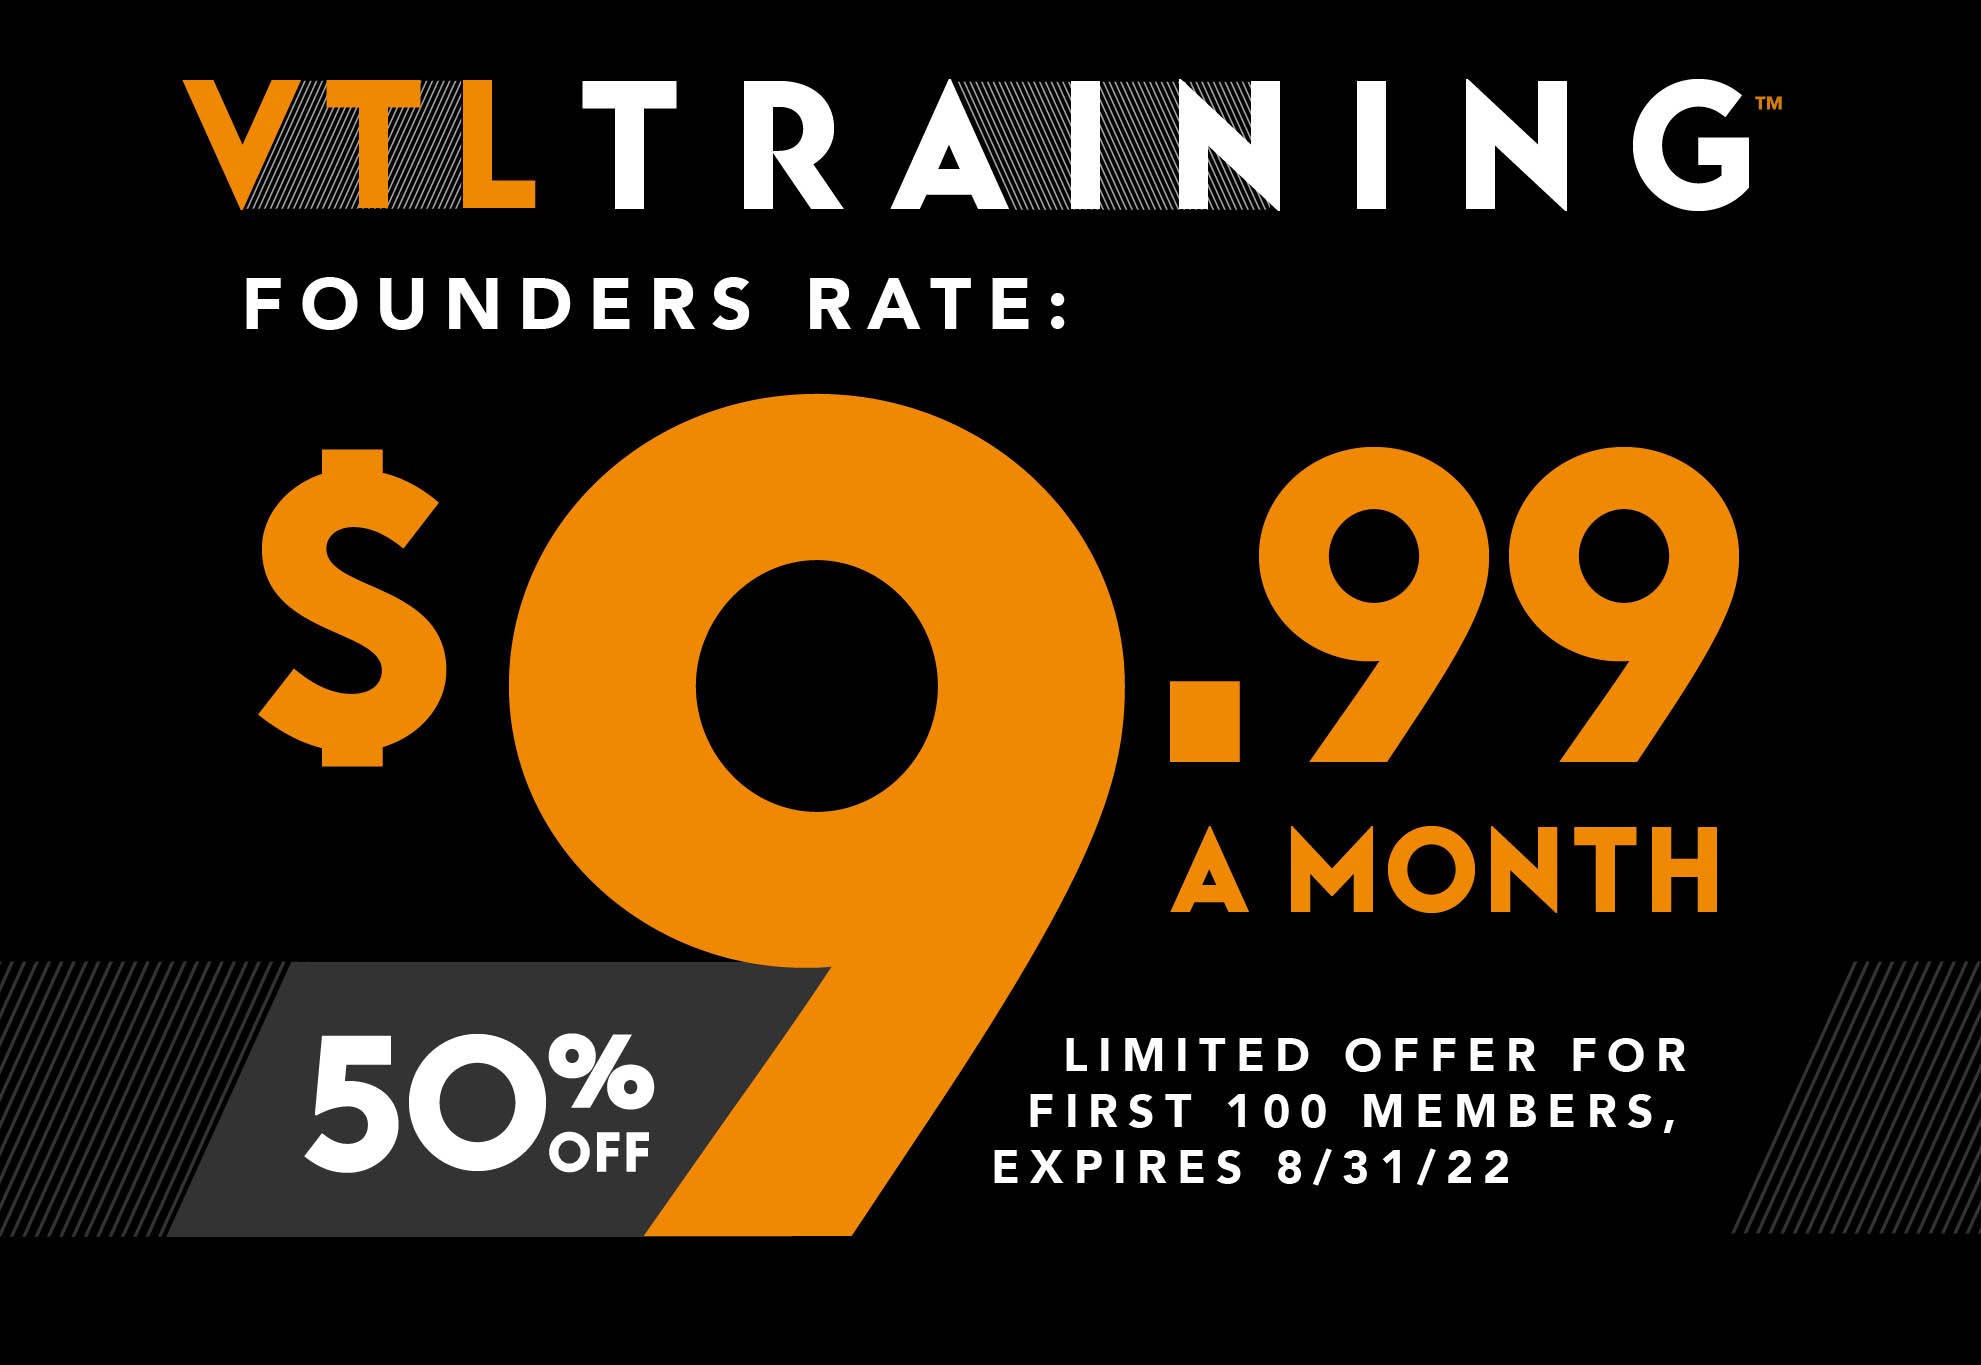 Get 50% off with our Limited Founders Rate